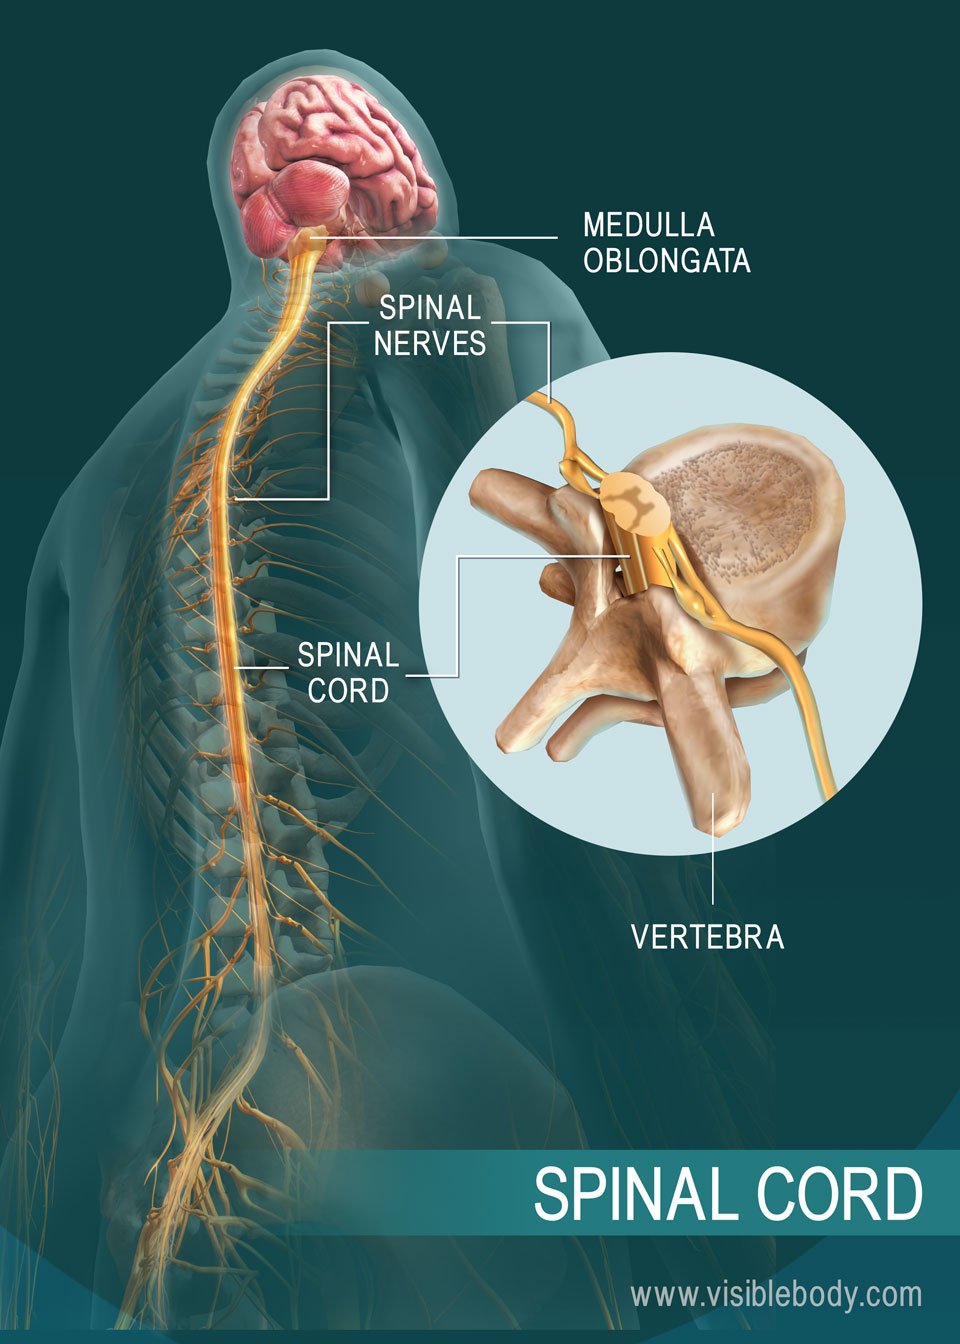 The structure of the spinal cord